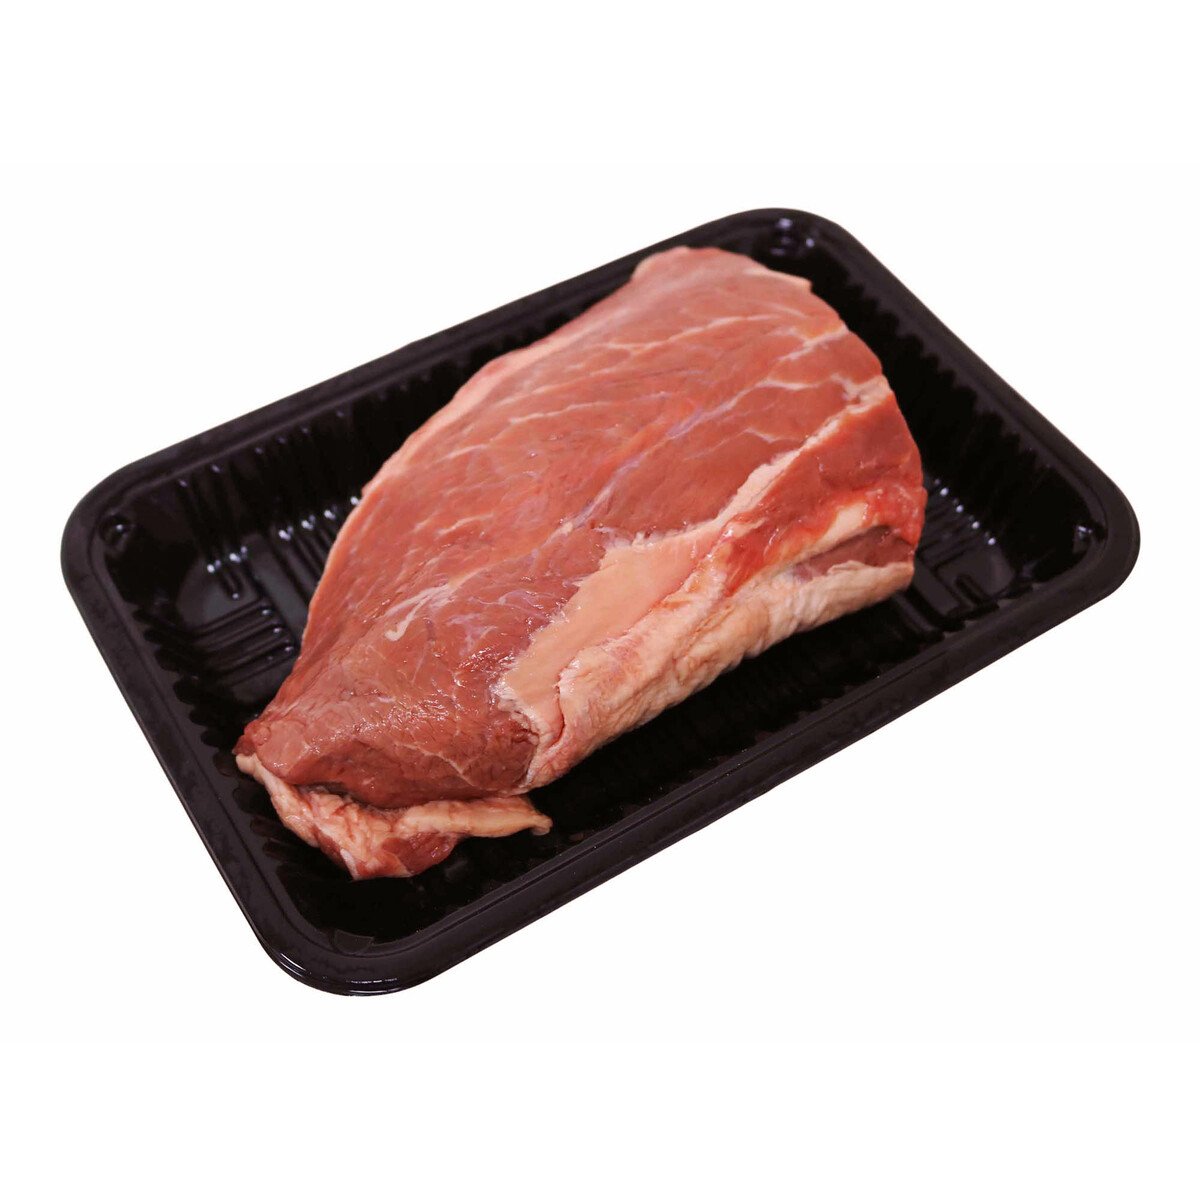 Prime Beef Chuck Tender Whole 500g Approx Weight